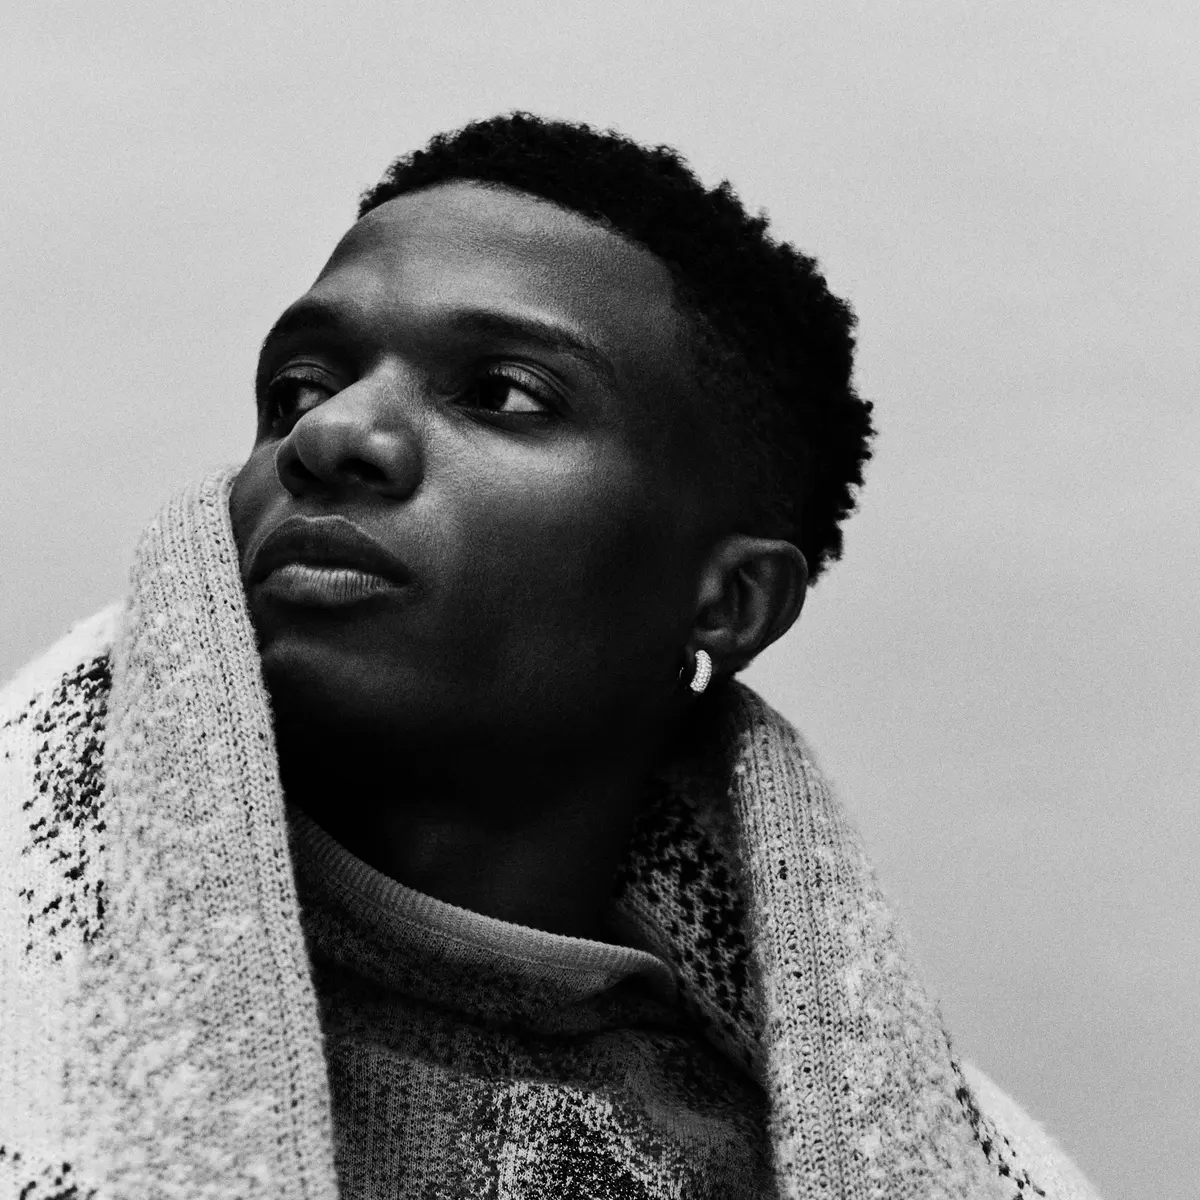 "I'm lost without you" -- Wizkid breaks down after Mother's funeral